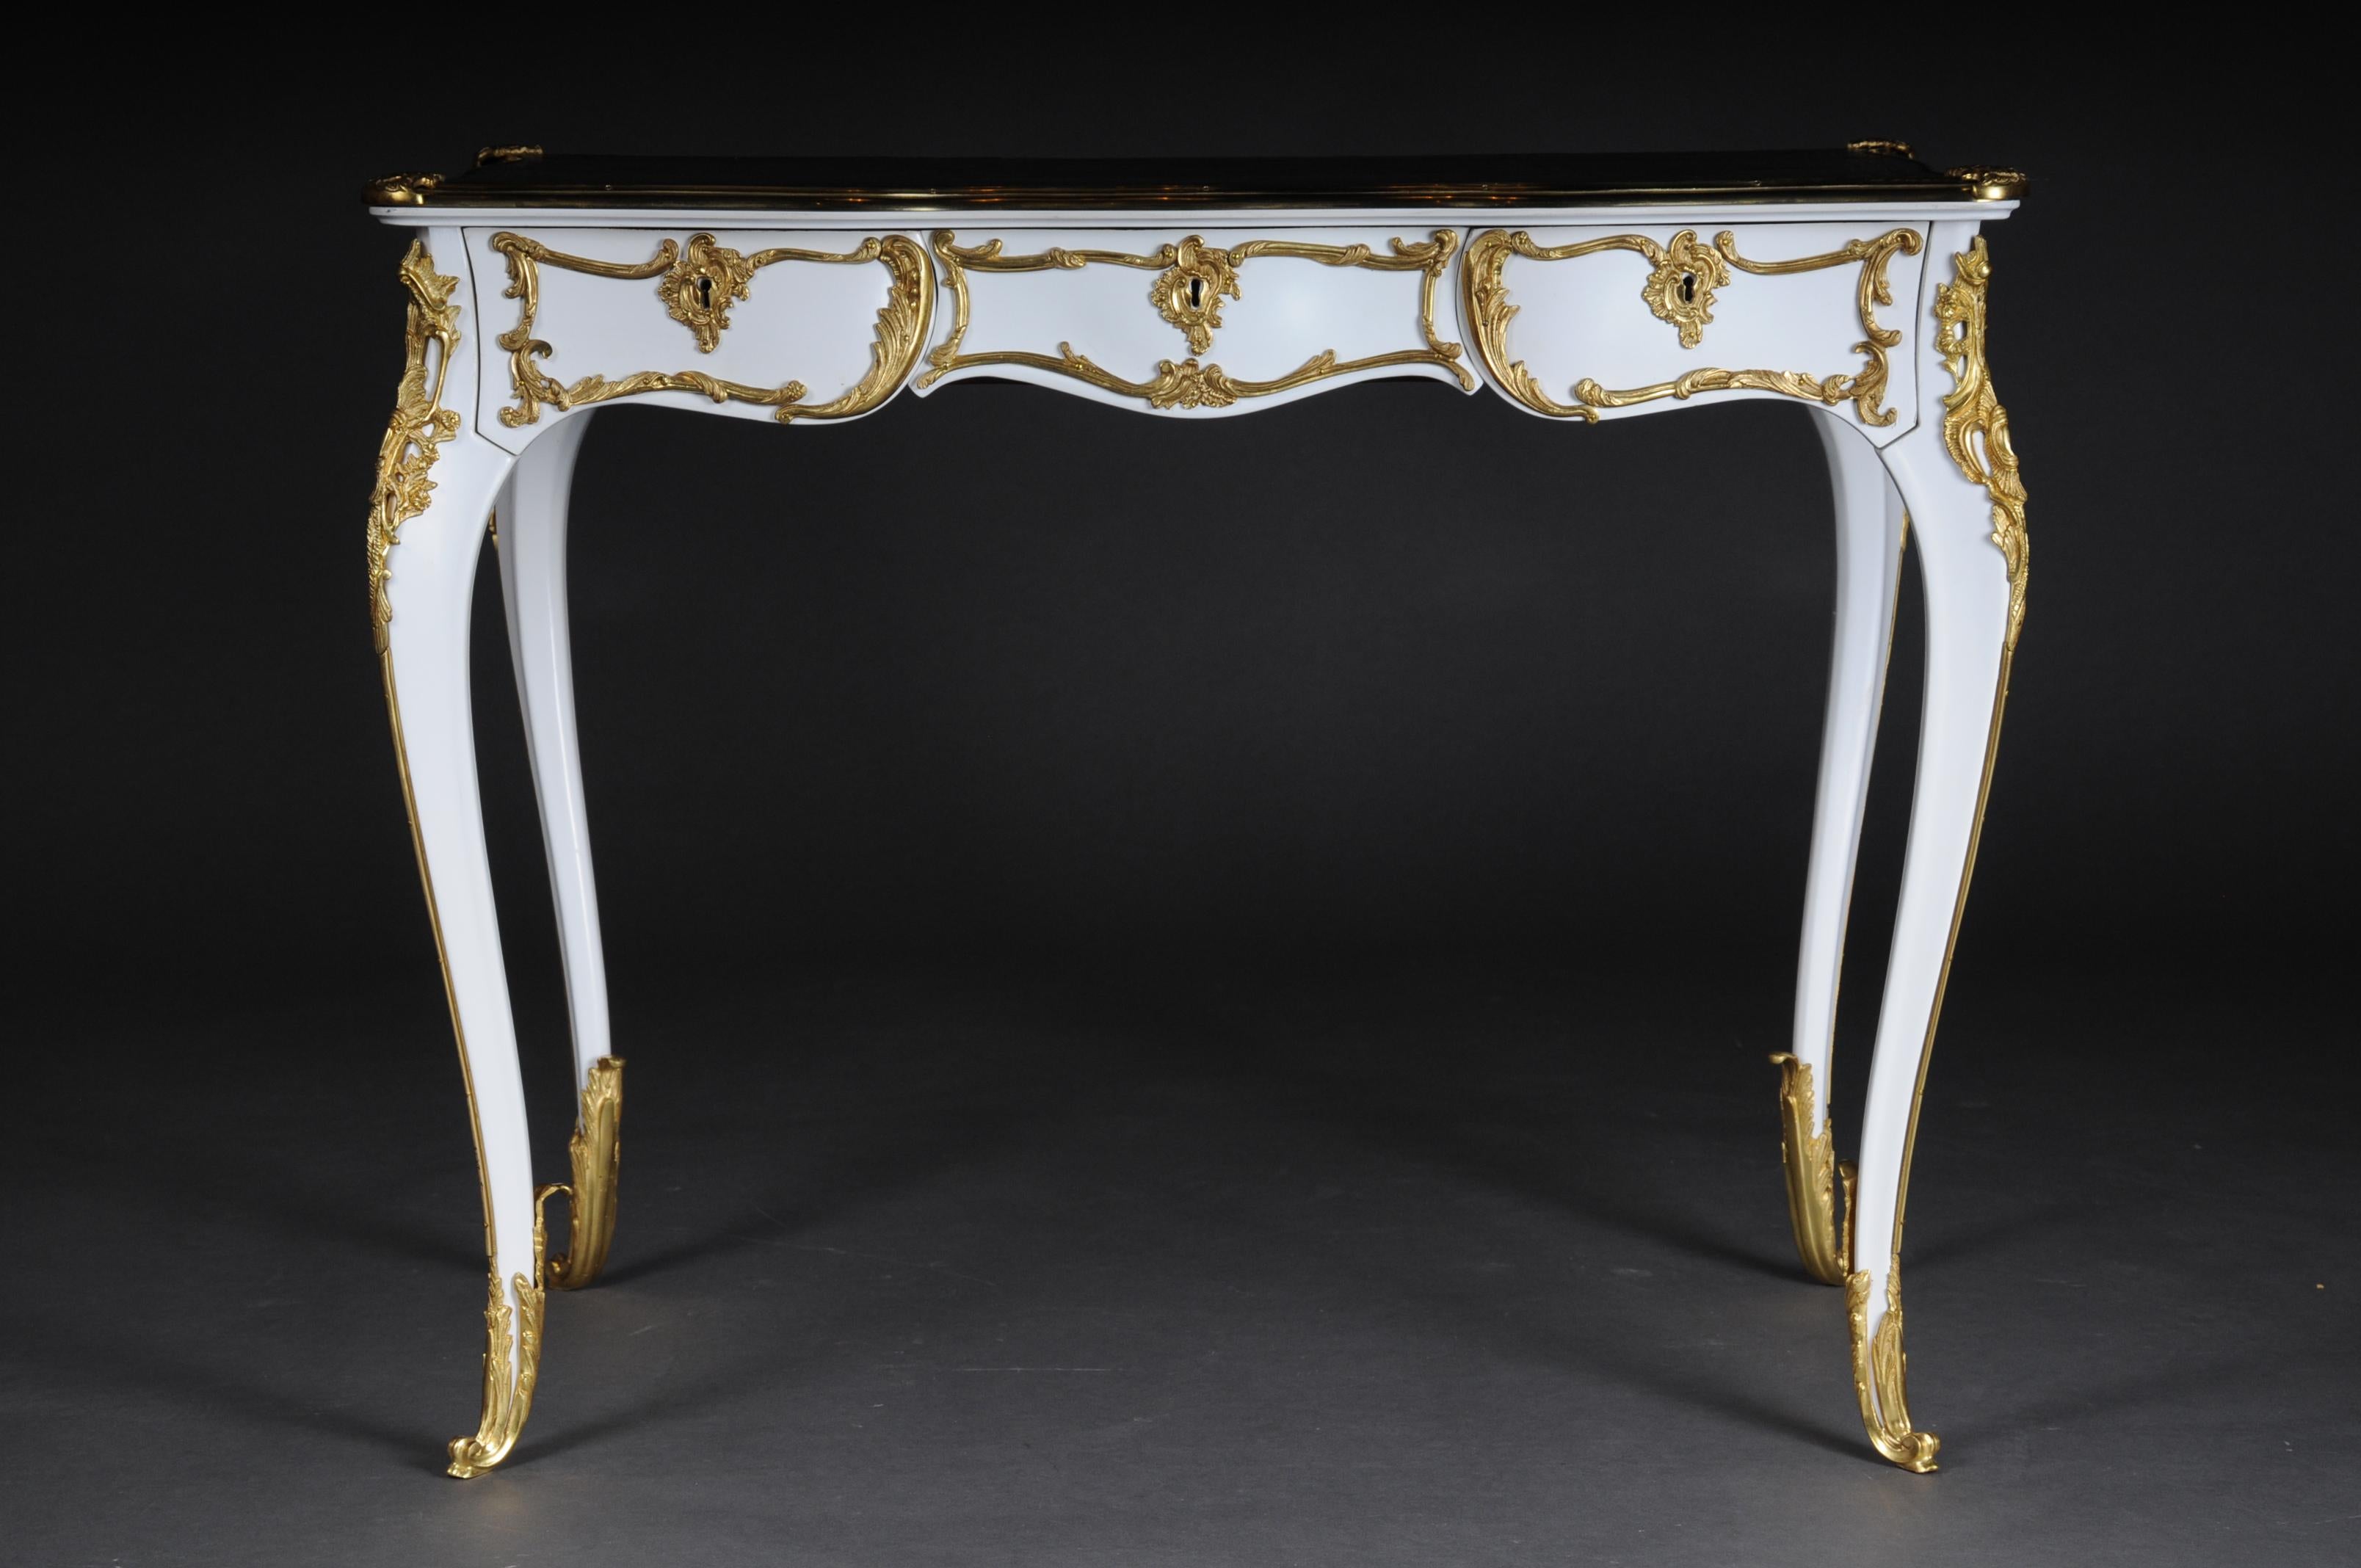 20th Century Luxurious White Bureau Plat / Writing Desk in Louis XV Style In Good Condition For Sale In Berlin, DE